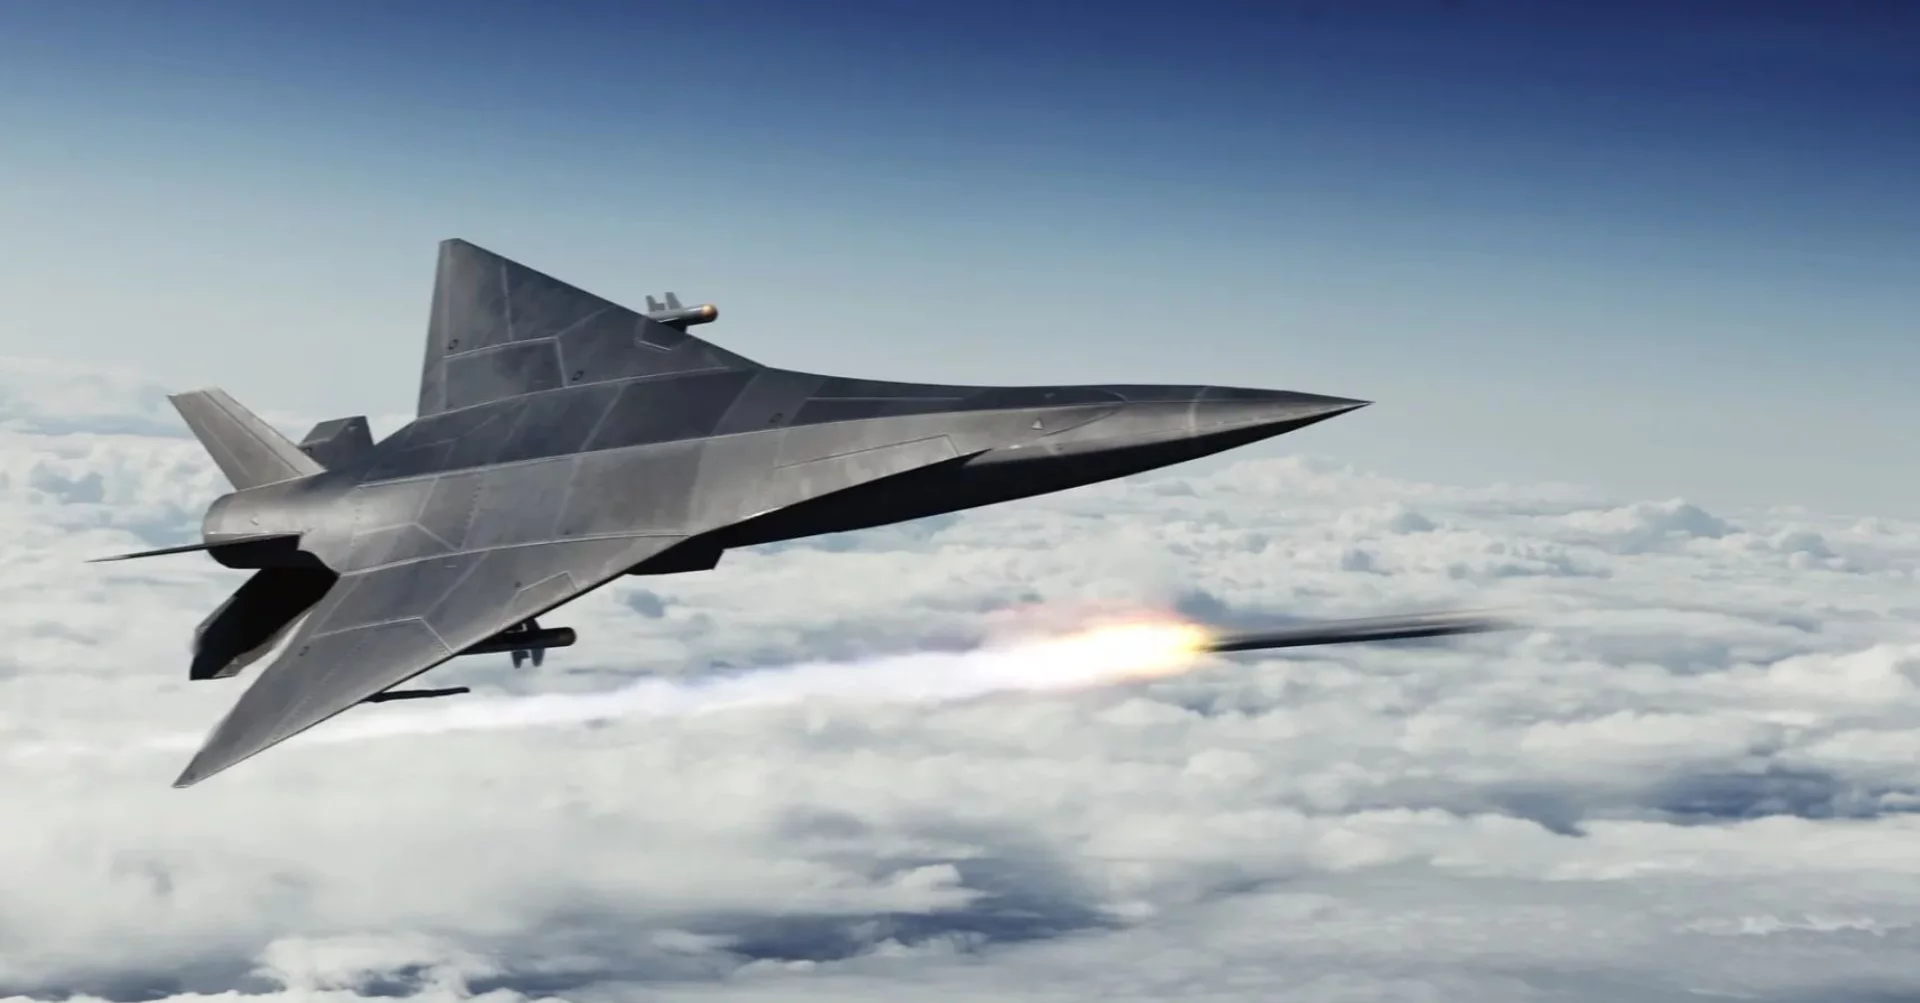 destinus_presents_IA-piloted_hypersonic_jet_able_to_strike_without_human_intervention-ebd905a7.webp